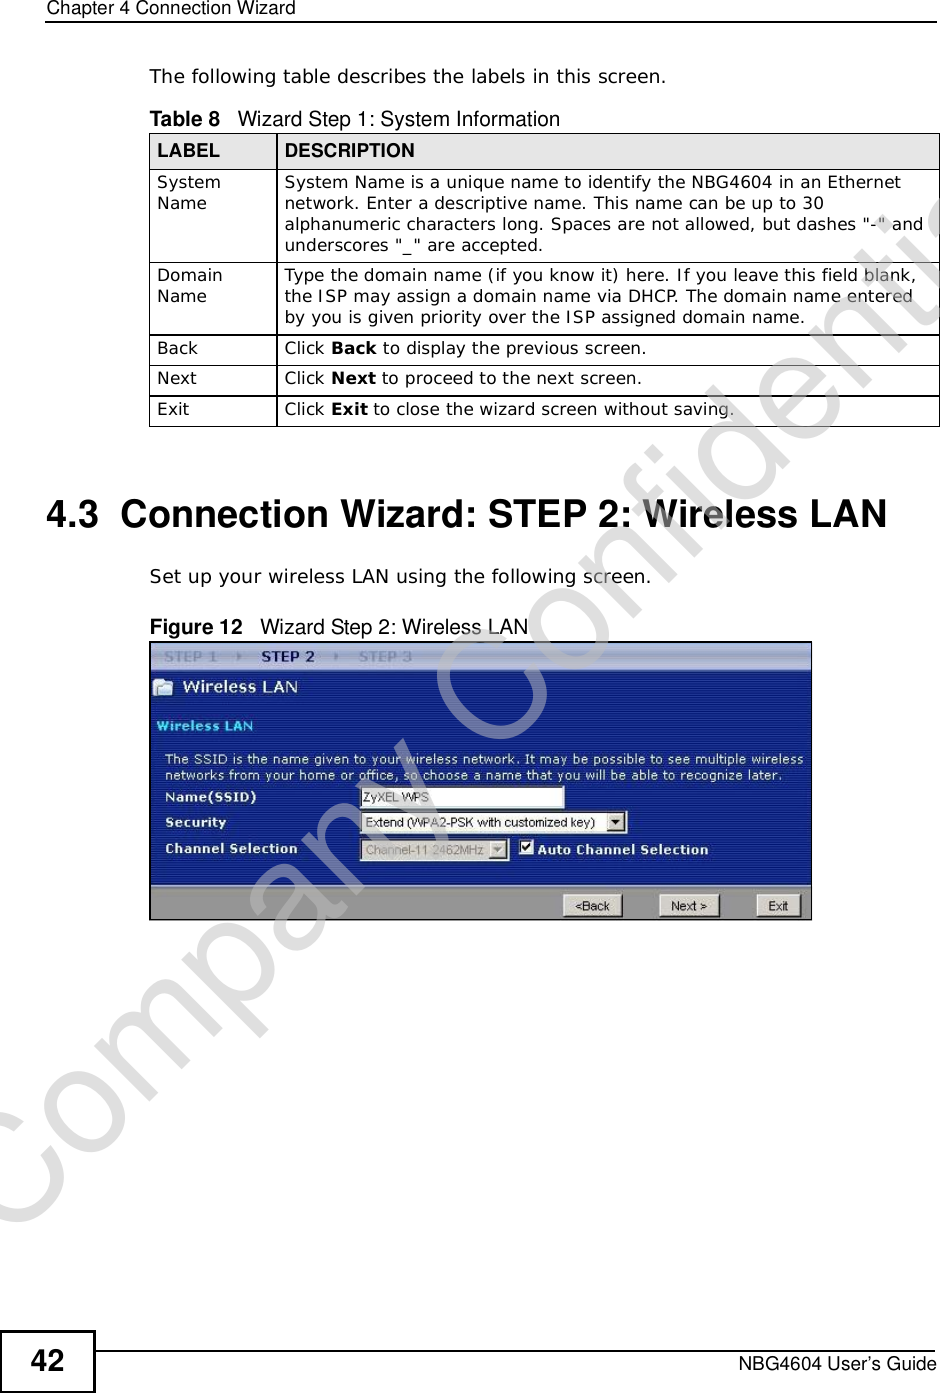 Chapter 4Connection WizardNBG4604 User’s Guide42The following table describes the labels in this screen.4.3  Connection Wizard: STEP 2: Wireless LANSet up your wireless LAN using the following screen.Figure 12   Wizard Step 2: Wireless LANTable 8   Wizard Step 1: System InformationLABEL DESCRIPTIONSystem Name System Name is a unique name to identify the NBG4604 in an Ethernet network. Enter a descriptive name. This name can be up to 30 alphanumeric characters long. Spaces are not allowed, but dashes &quot;-&quot; and underscores &quot;_&quot; are accepted. DomainName Type the domain name (if you know it) here. If you leave this field blank, the ISP may assign a domain name via DHCP. The domain name entered by you is given priority over the ISP assigned domain name.Back Click Back to display the previous screen.Next Click Next to proceed to the next screen. Exit Click Exit to close the wizard screen without saving.Company Confidential